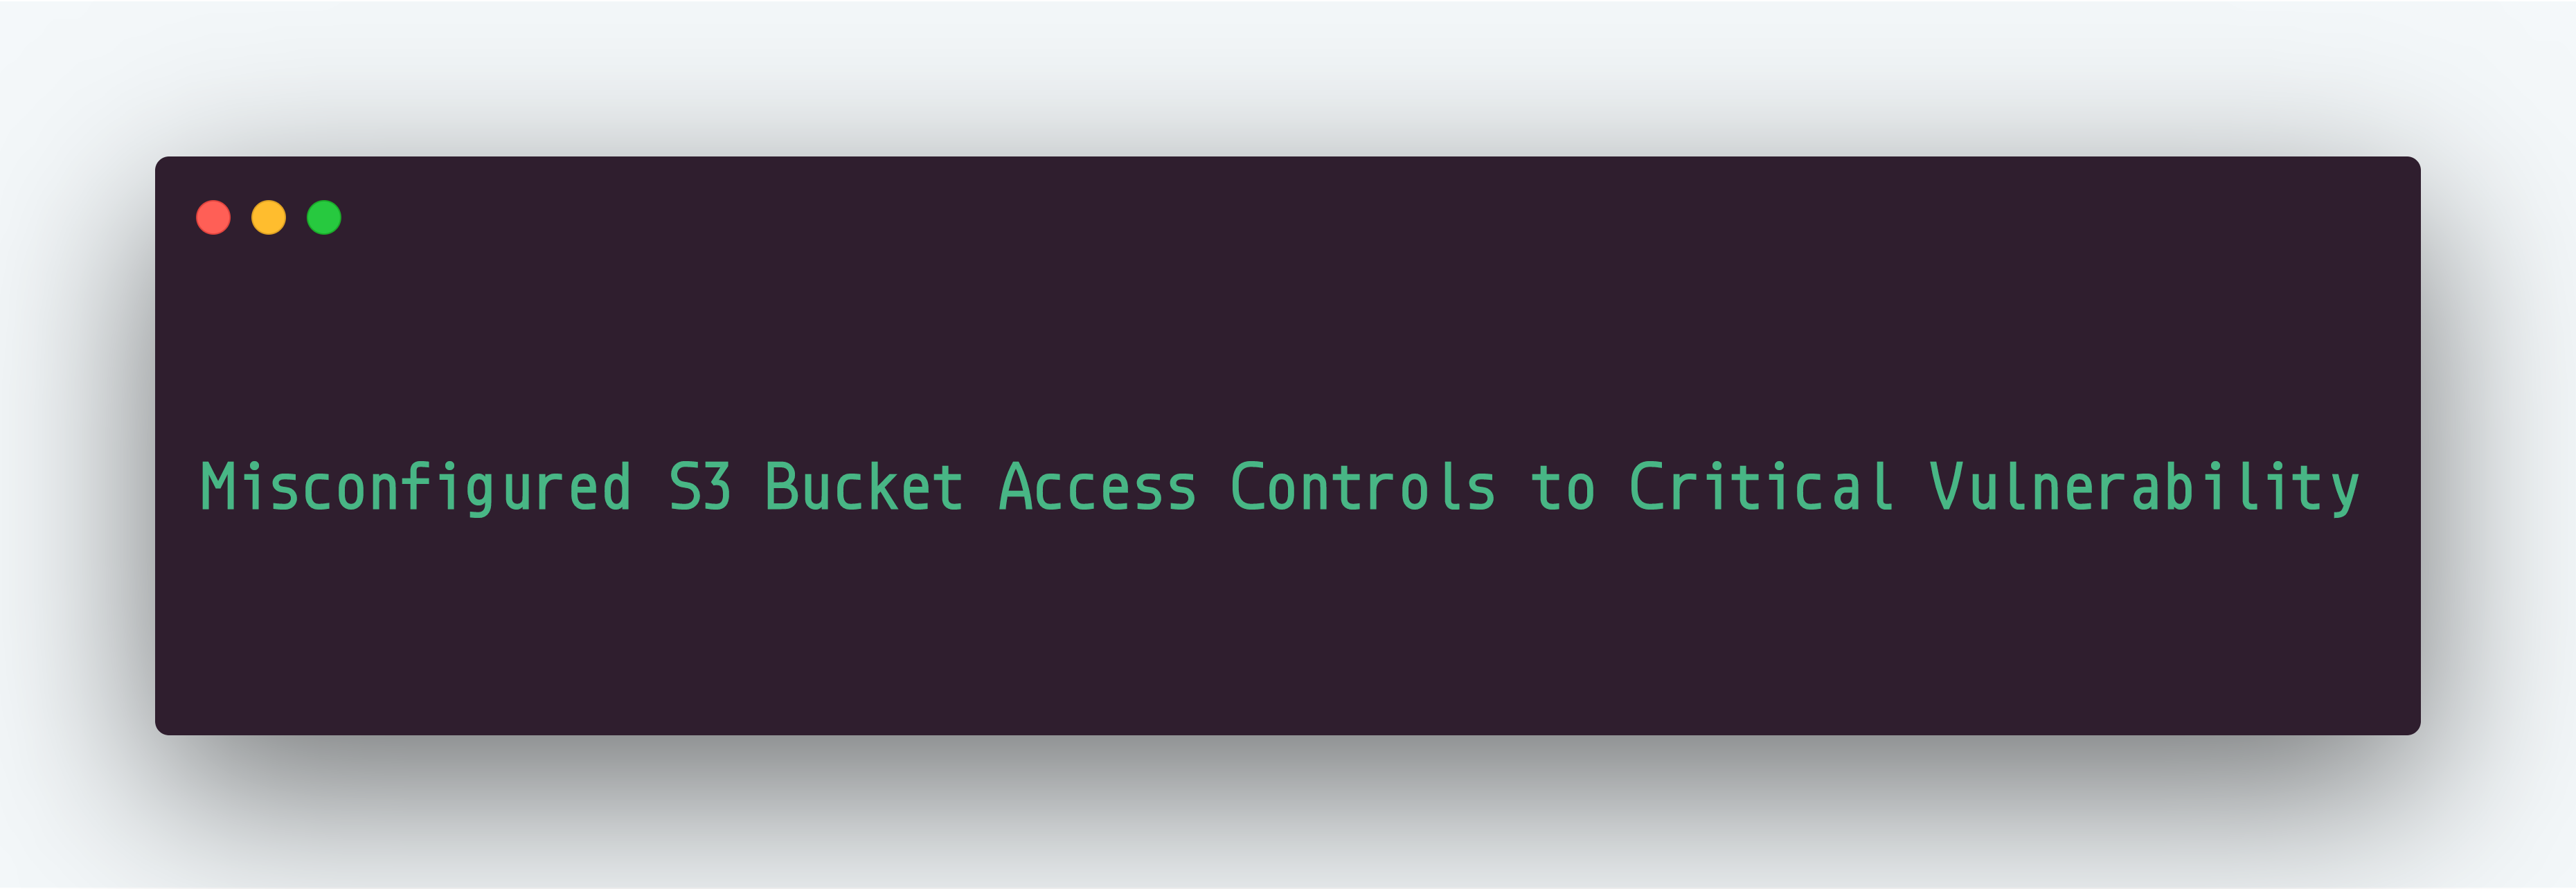 Misconfigured S3 Bucket Access Controls to Critical Vulnerability